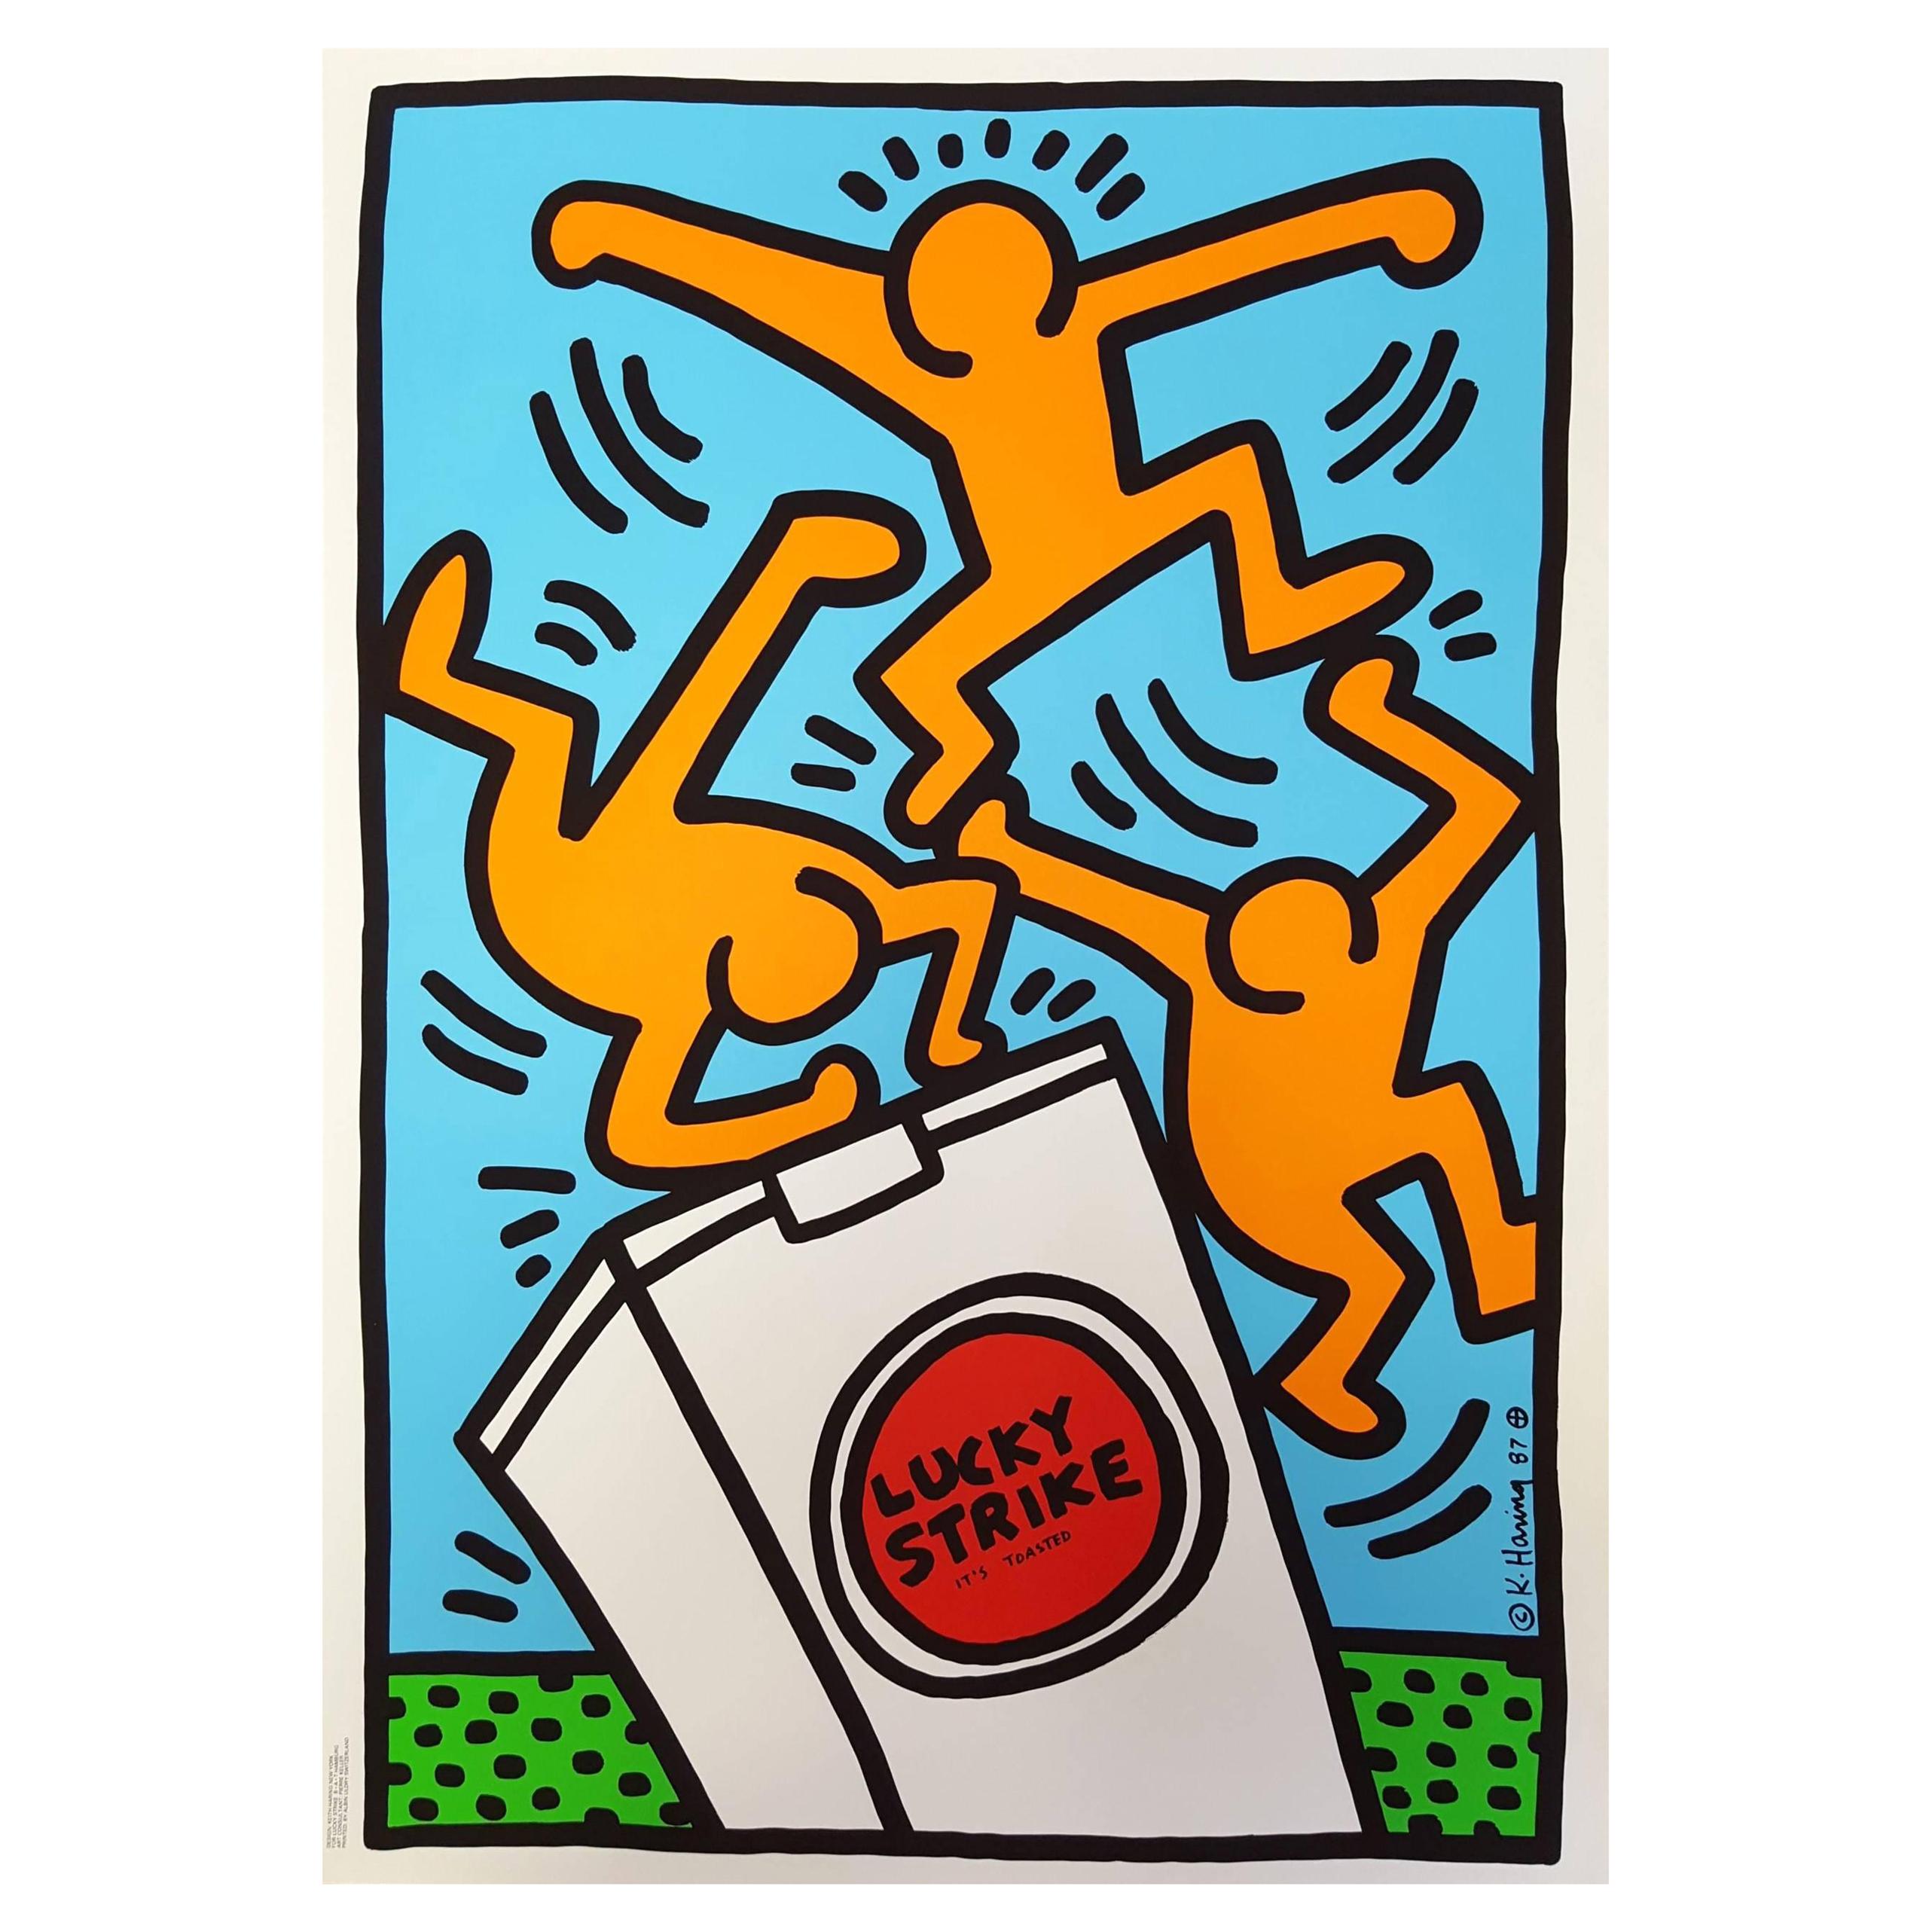 Keith Haring 'Lucky Strike III' Rare Original 1987 Poster Print on Wove Paper For Sale